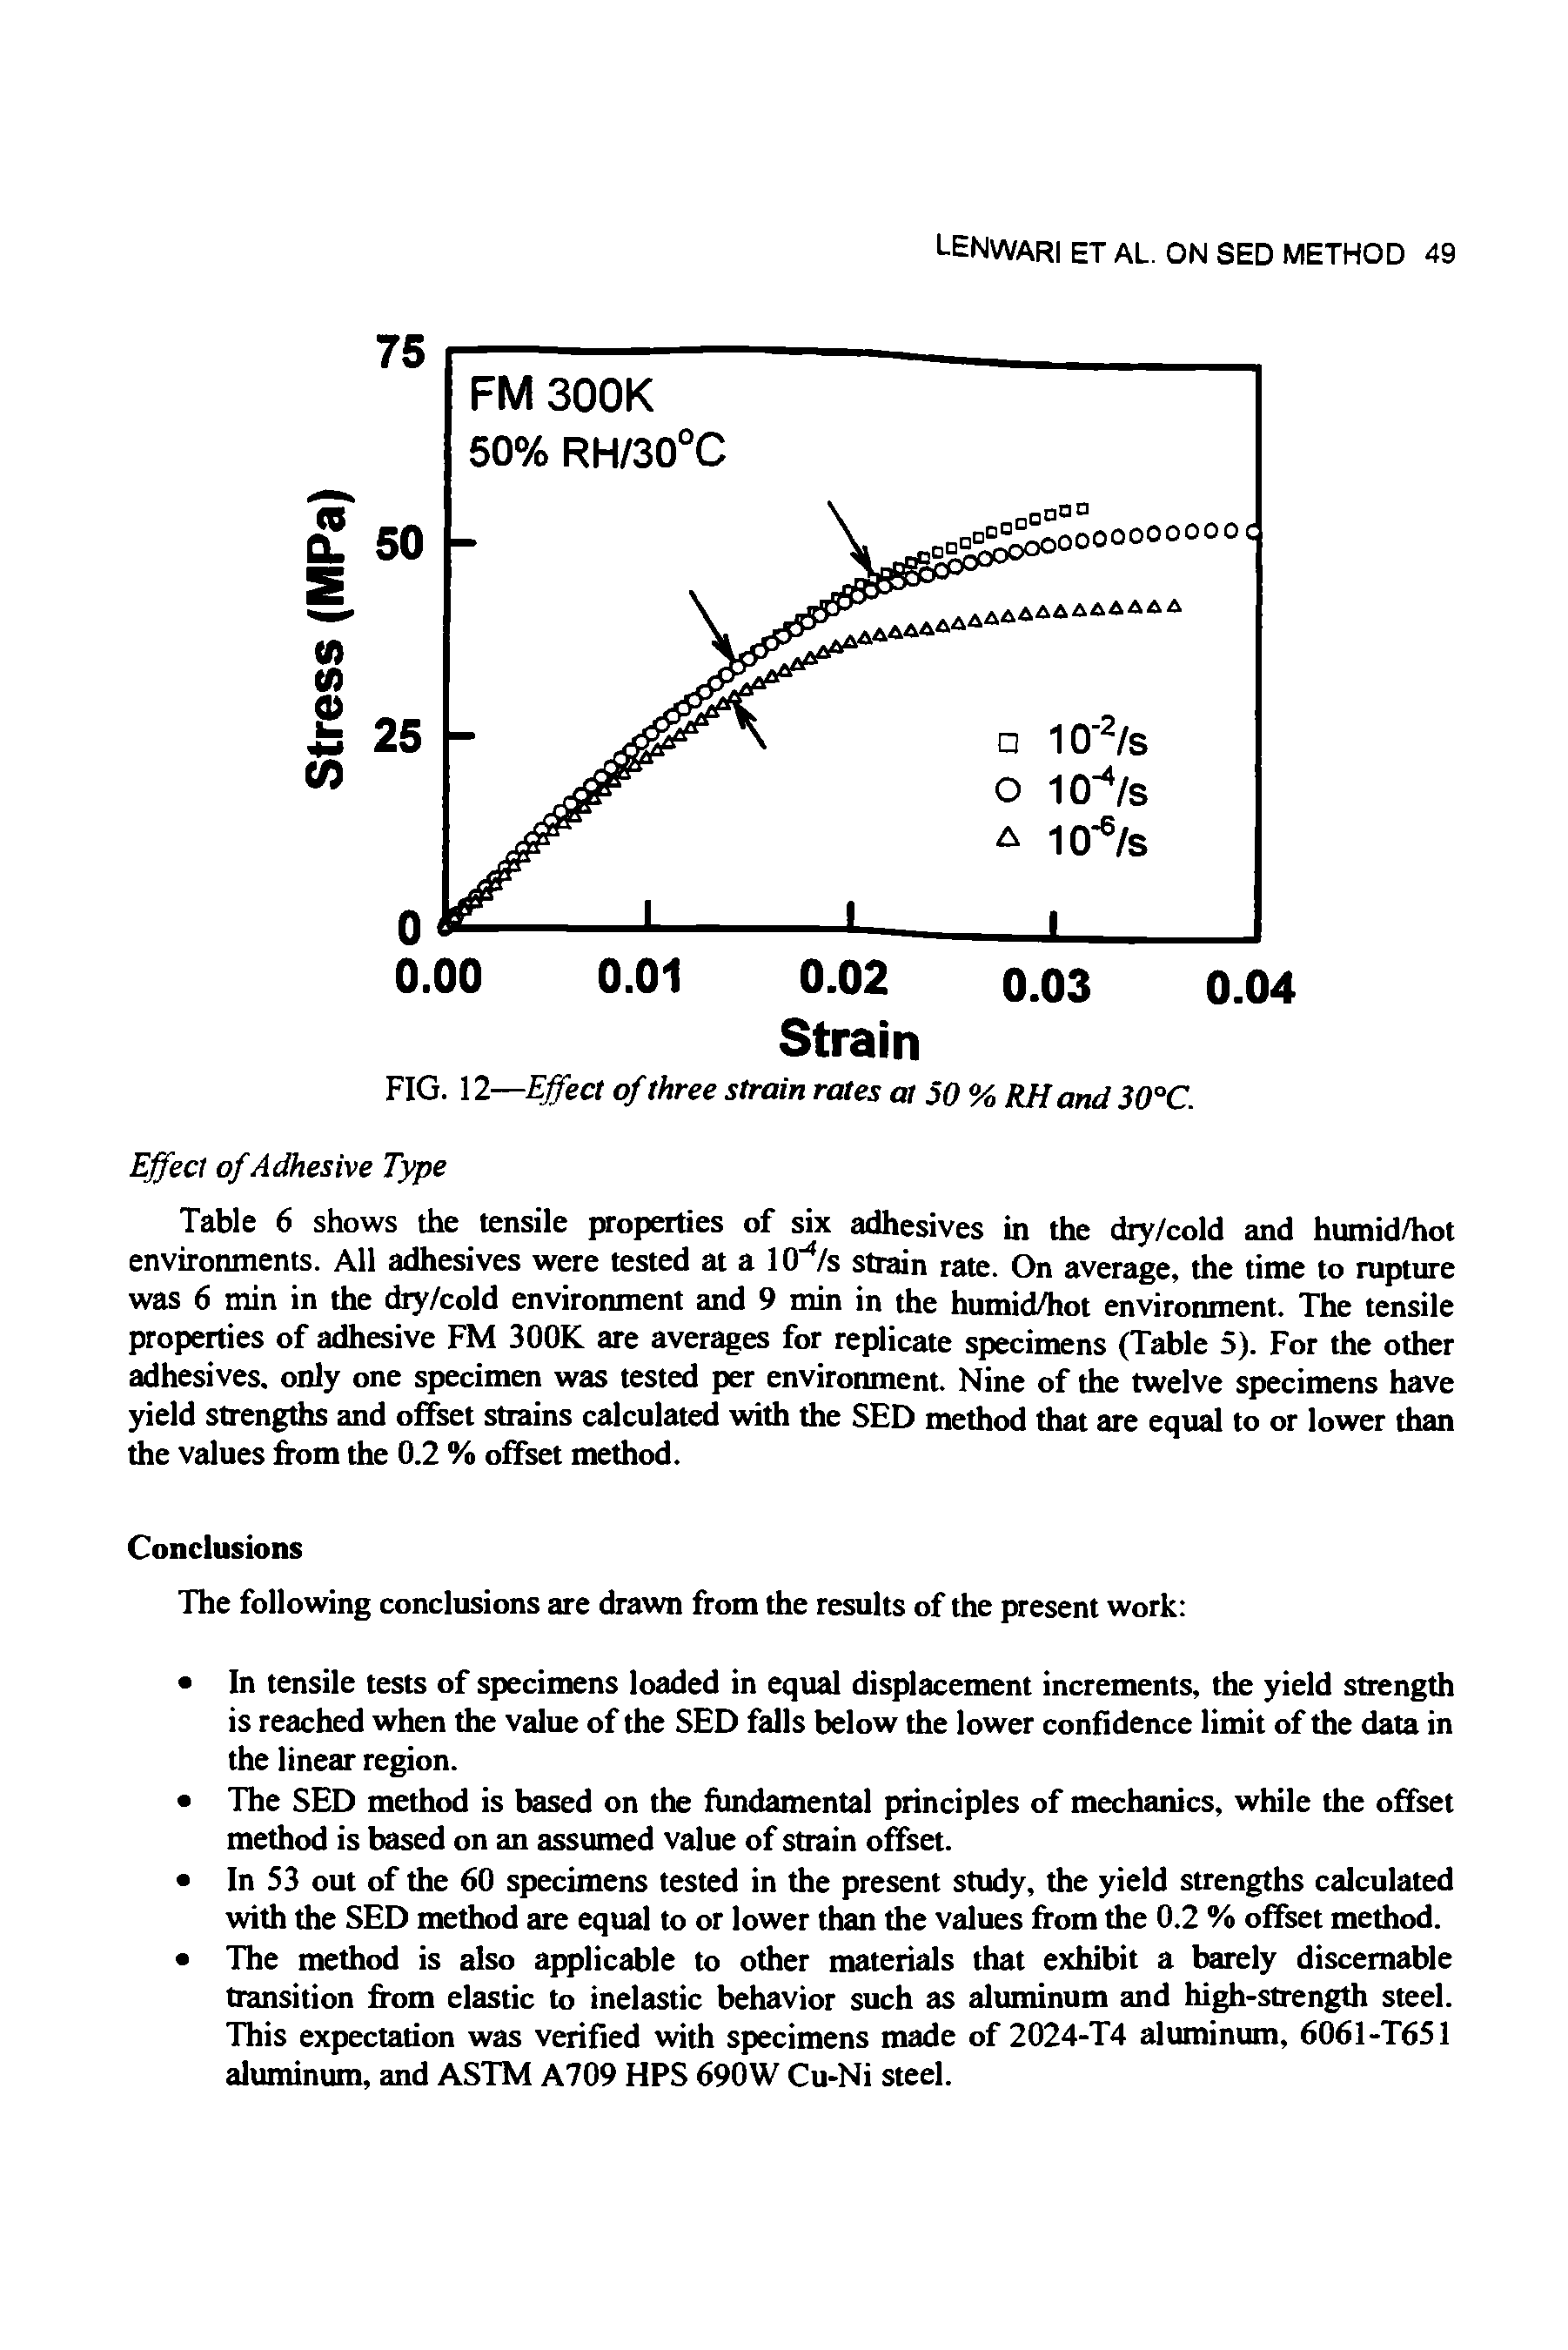 Table 6 shows the tensile properties of six adhesives in the diy/cold and humid/hot environments. All adhesives were tested at a 10" /s strain rate. On average, the time to rupture was 6 min in the diy/cold environment and 9 min in the humid/hot environment. The tensile properties of adhesive FM 300K are averages for replicate specimens (Table 5). For the other adhesives, only one specimen was tested per environment. Nine of the twelve specimens have yield strengths and offset strains calculated with the SED method that are equal to or lower than the values from the 0.2 % offset method.